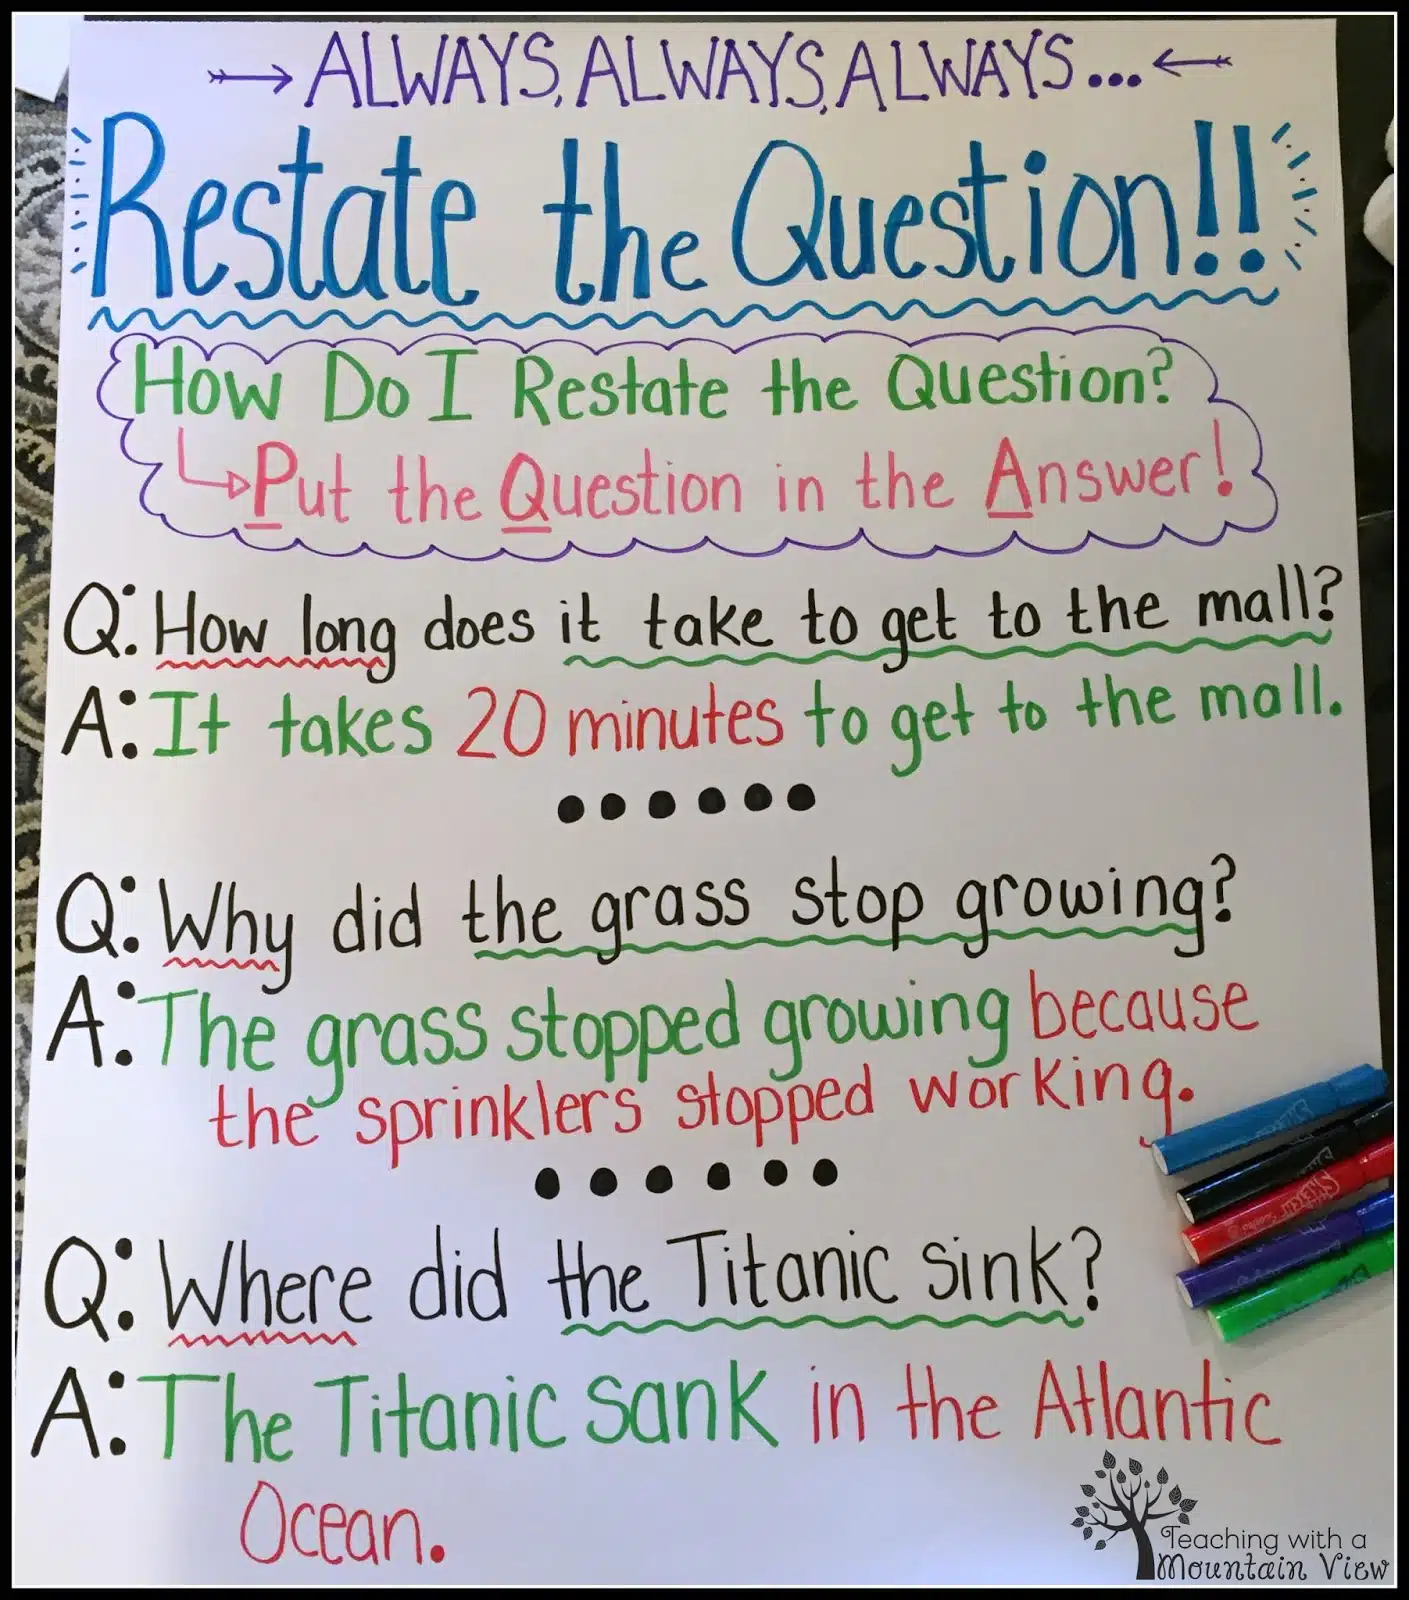 teach students to PQA or restate the question for test prep